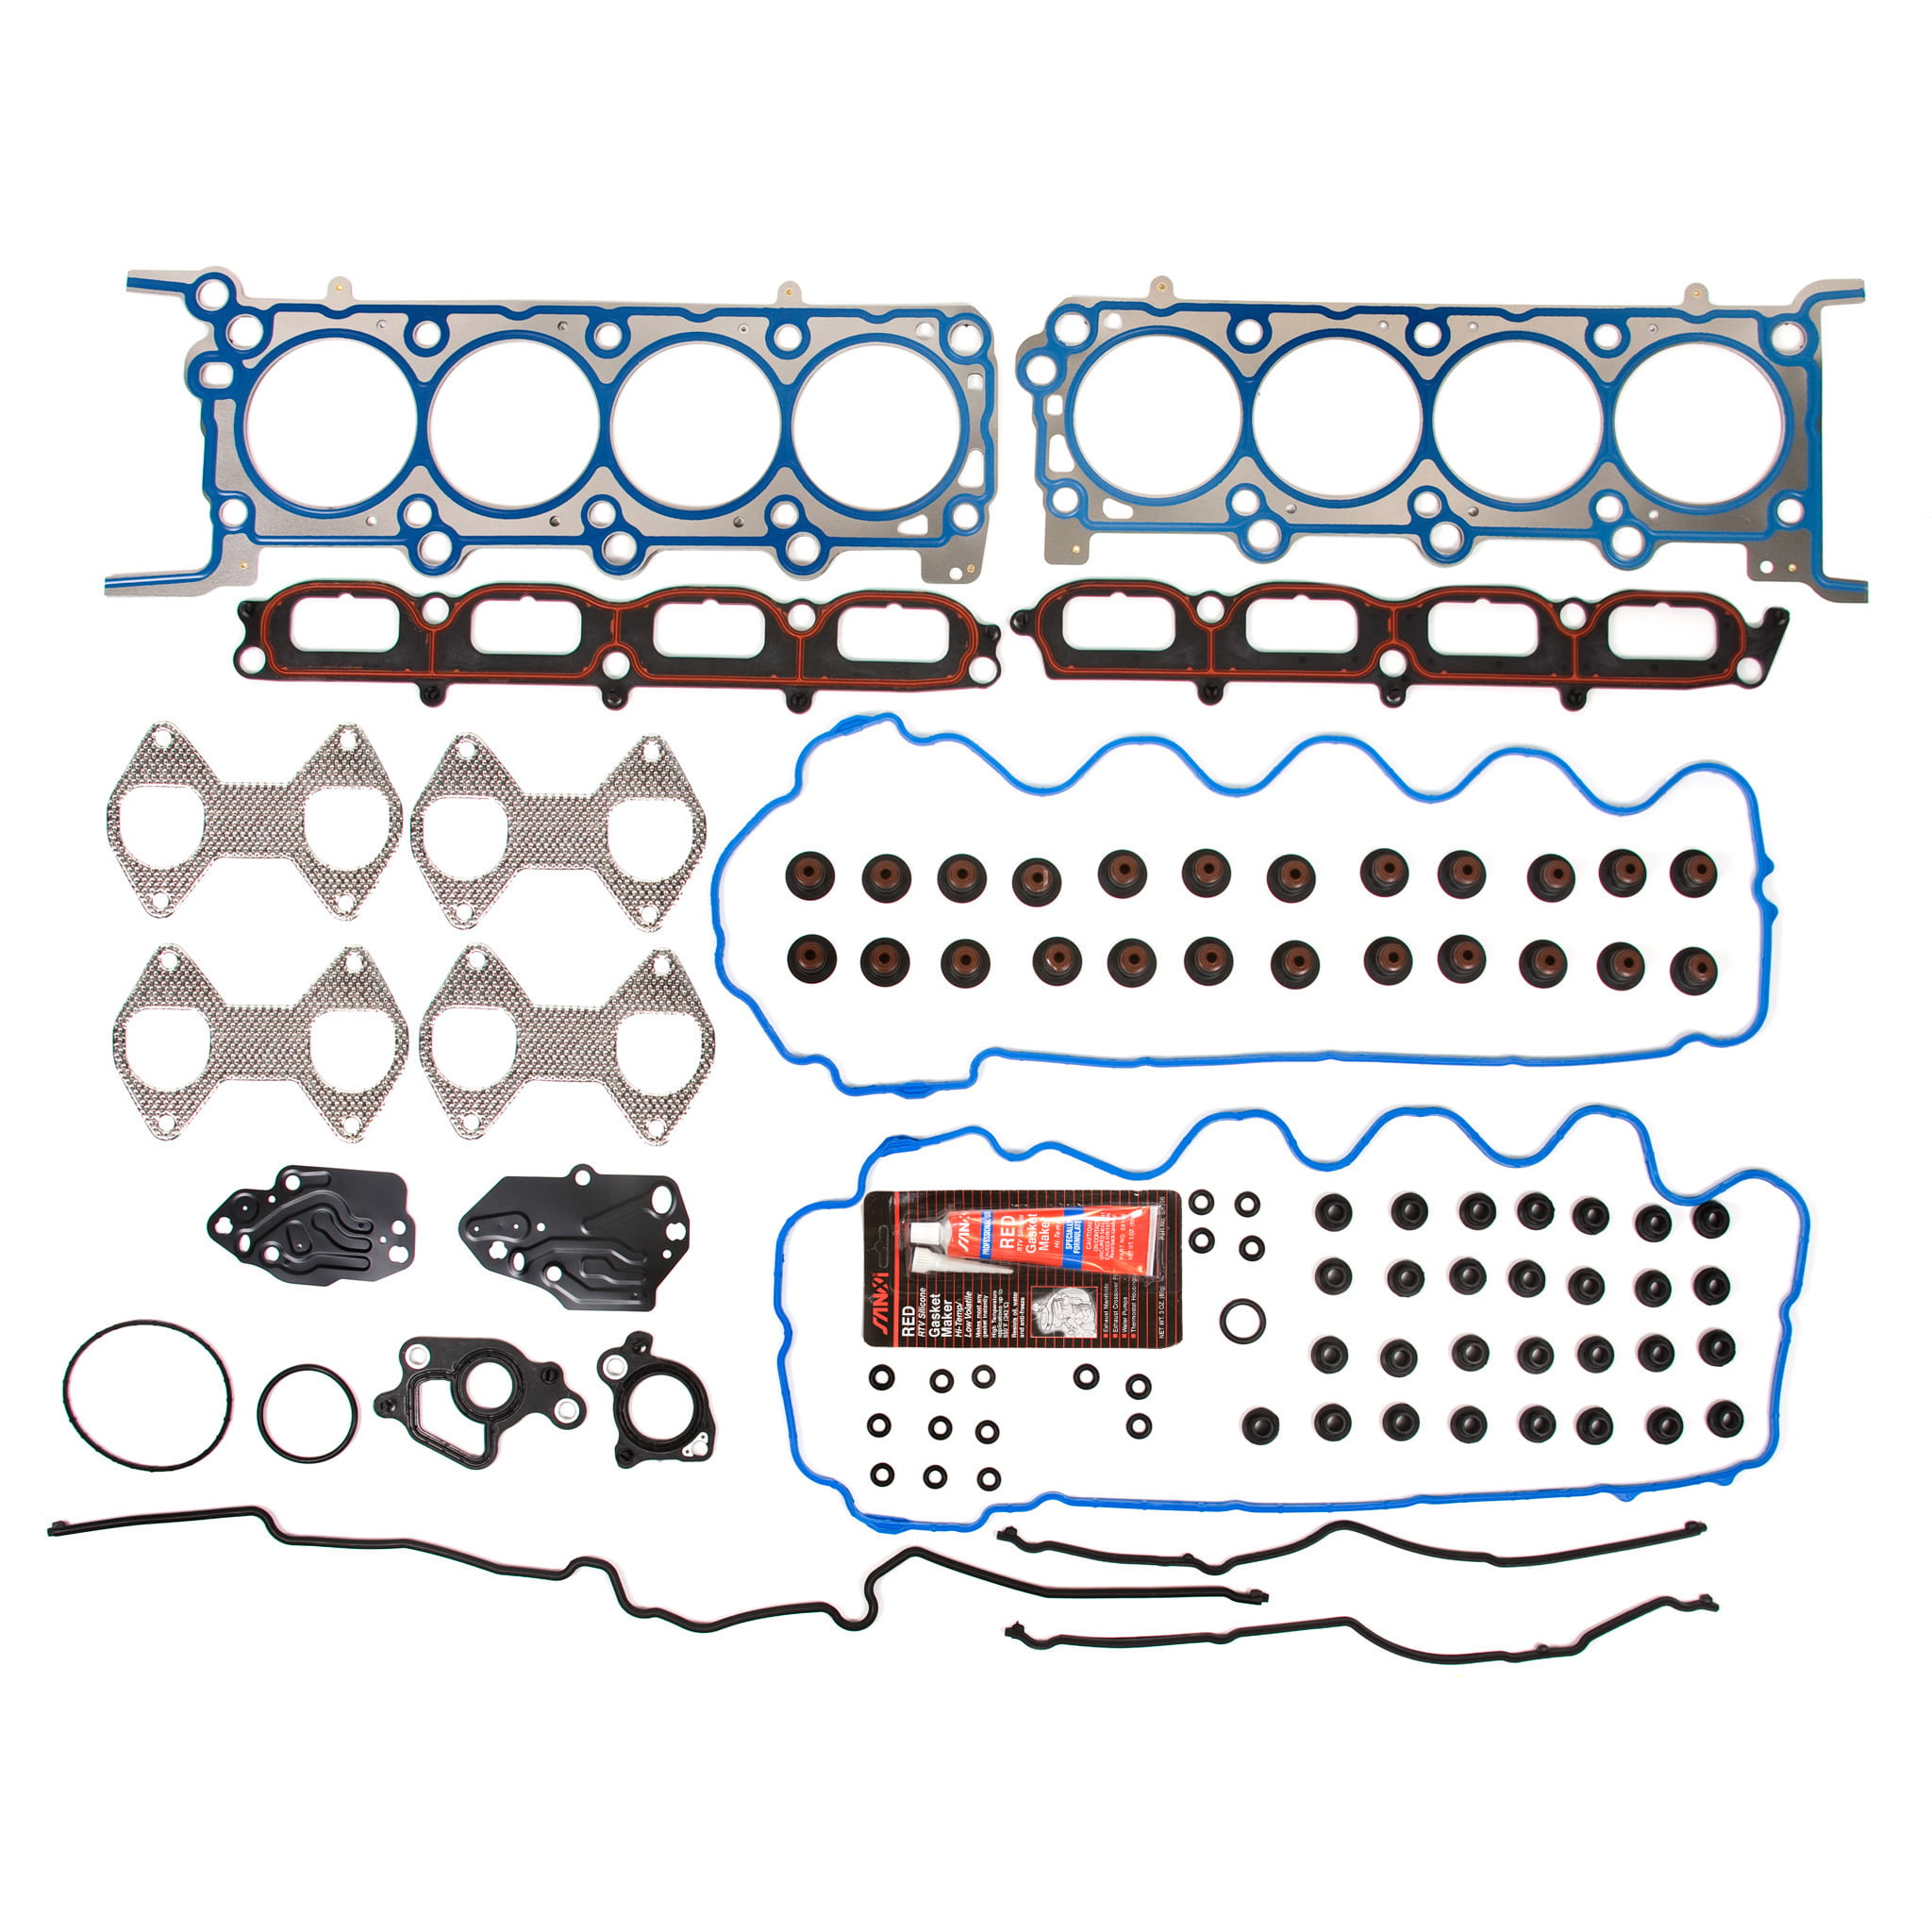 Evergreen 8-21200 Head Gasket Set Fits 04-06 Ford Expedition F150 F250  Lincoln 5.4 TRITON, VIN